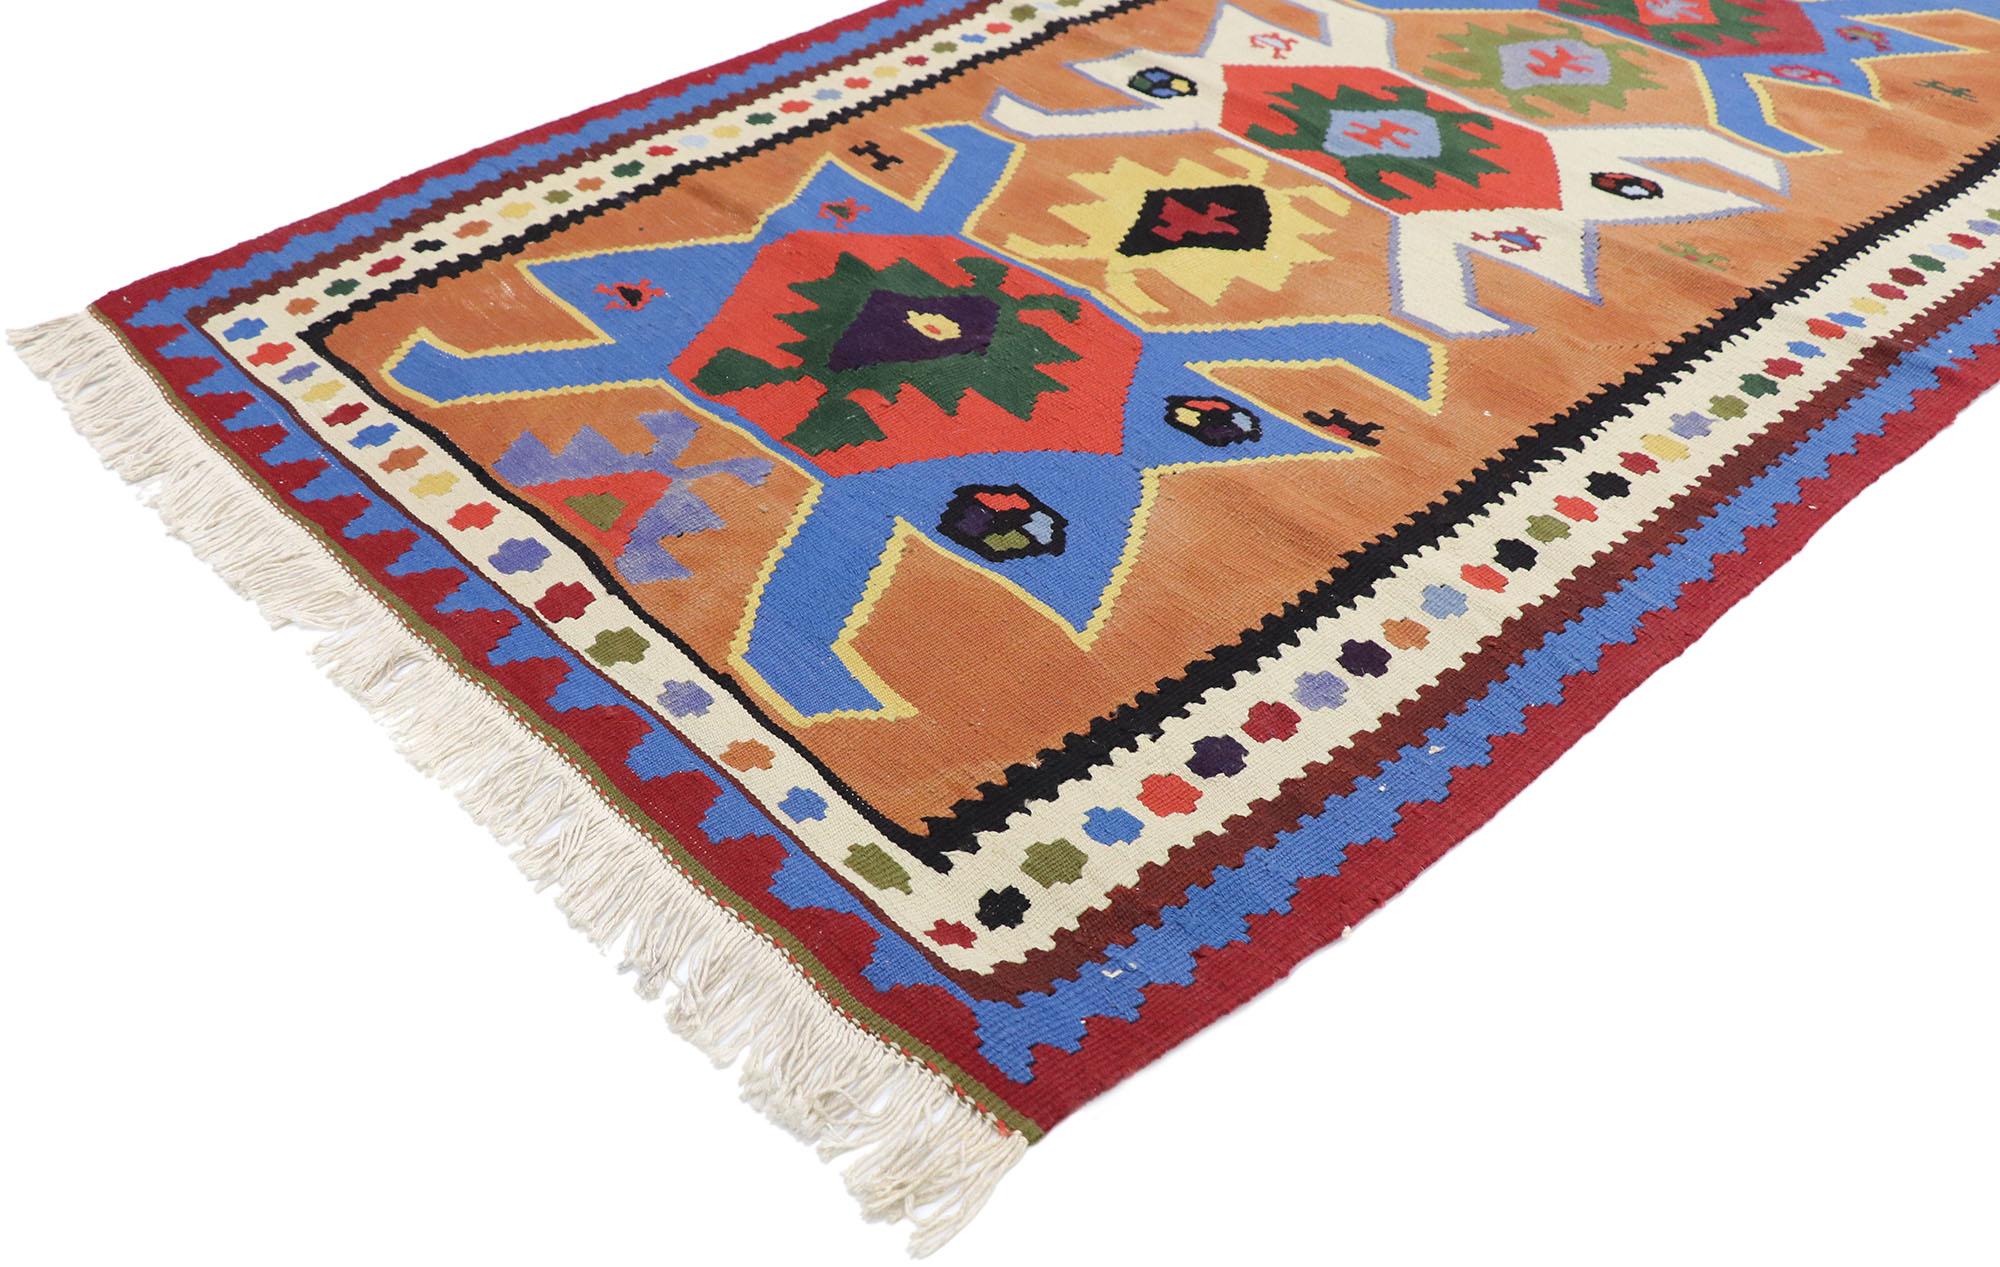 77820, vintage Persian Shiraz Kilim rug with Tribal style. With its bold expressive design, incredible detail and texture, this hand-woven wool vintage Persian Shiraz Kilim rug is a captivating vision of woven beauty. The abrashed brown field